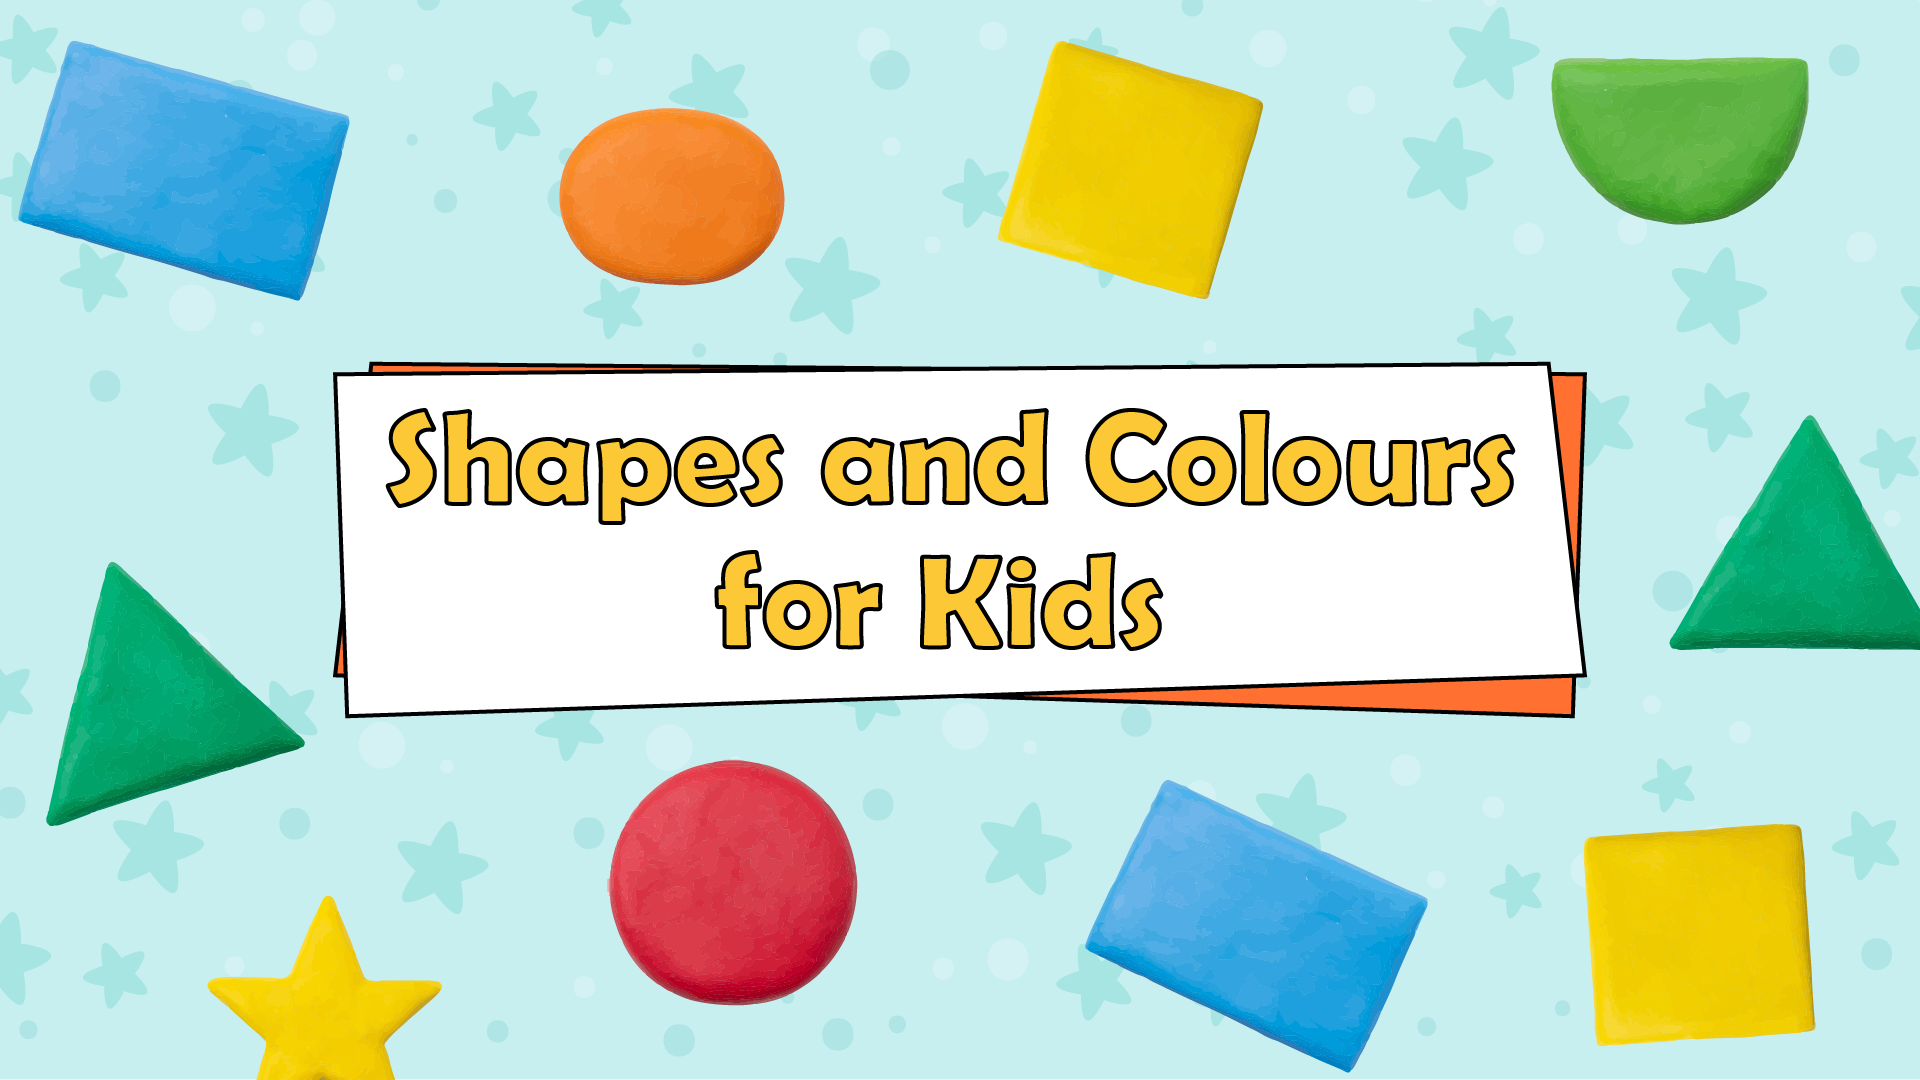 Shapes and Colours for Kids